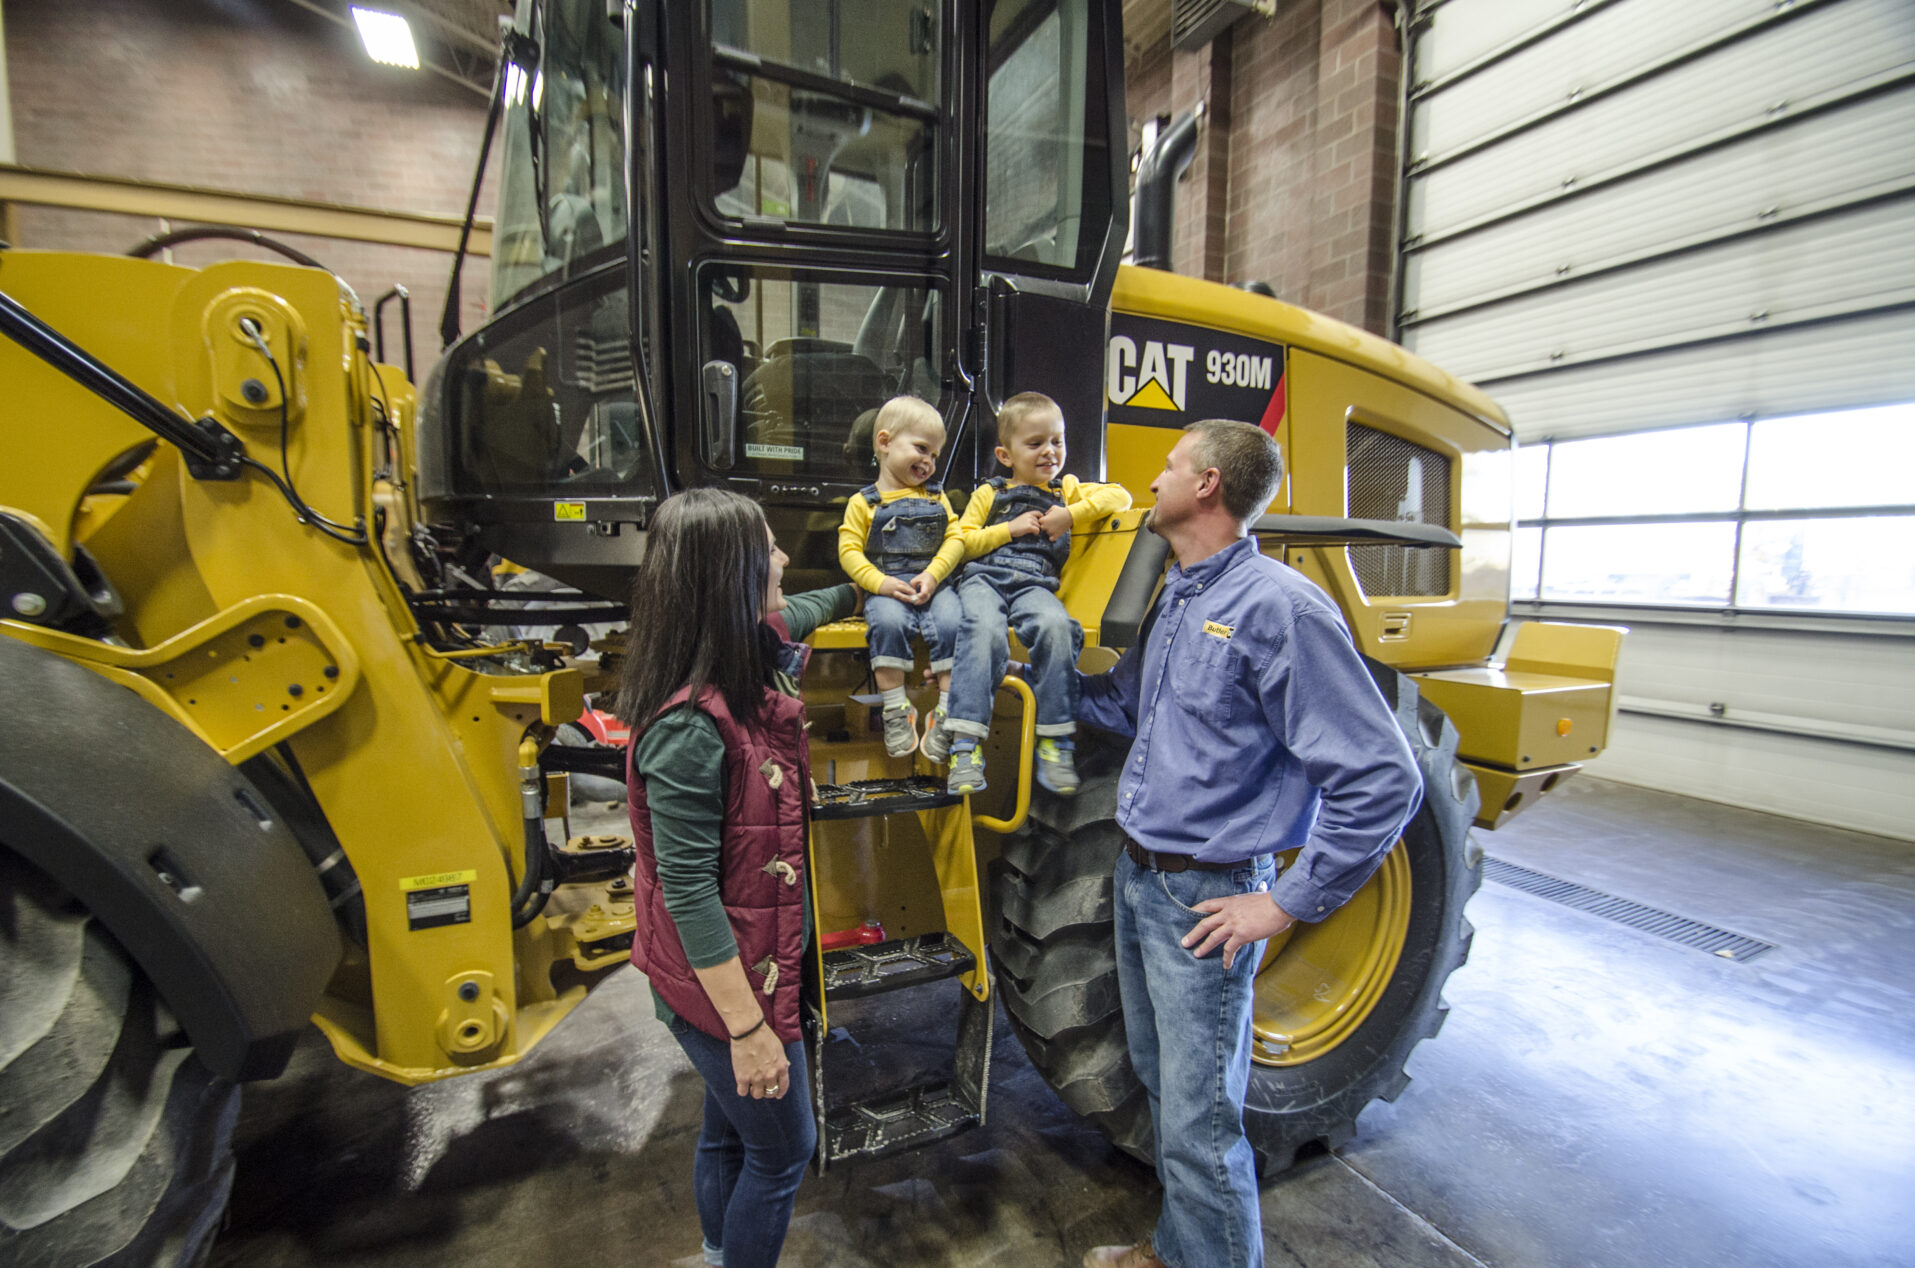 Two parents next to twins sitting on a CAT 930M.